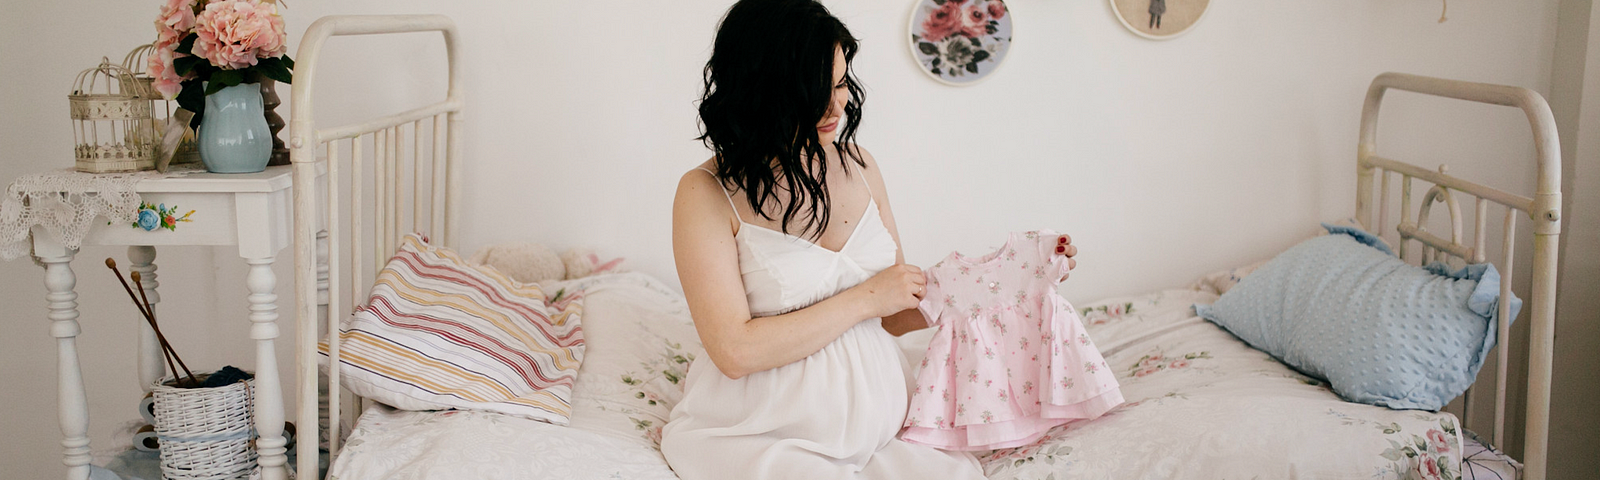 Pregnant woman in a white sun dress sitting on a child’s bed folding a tiny pink dress.